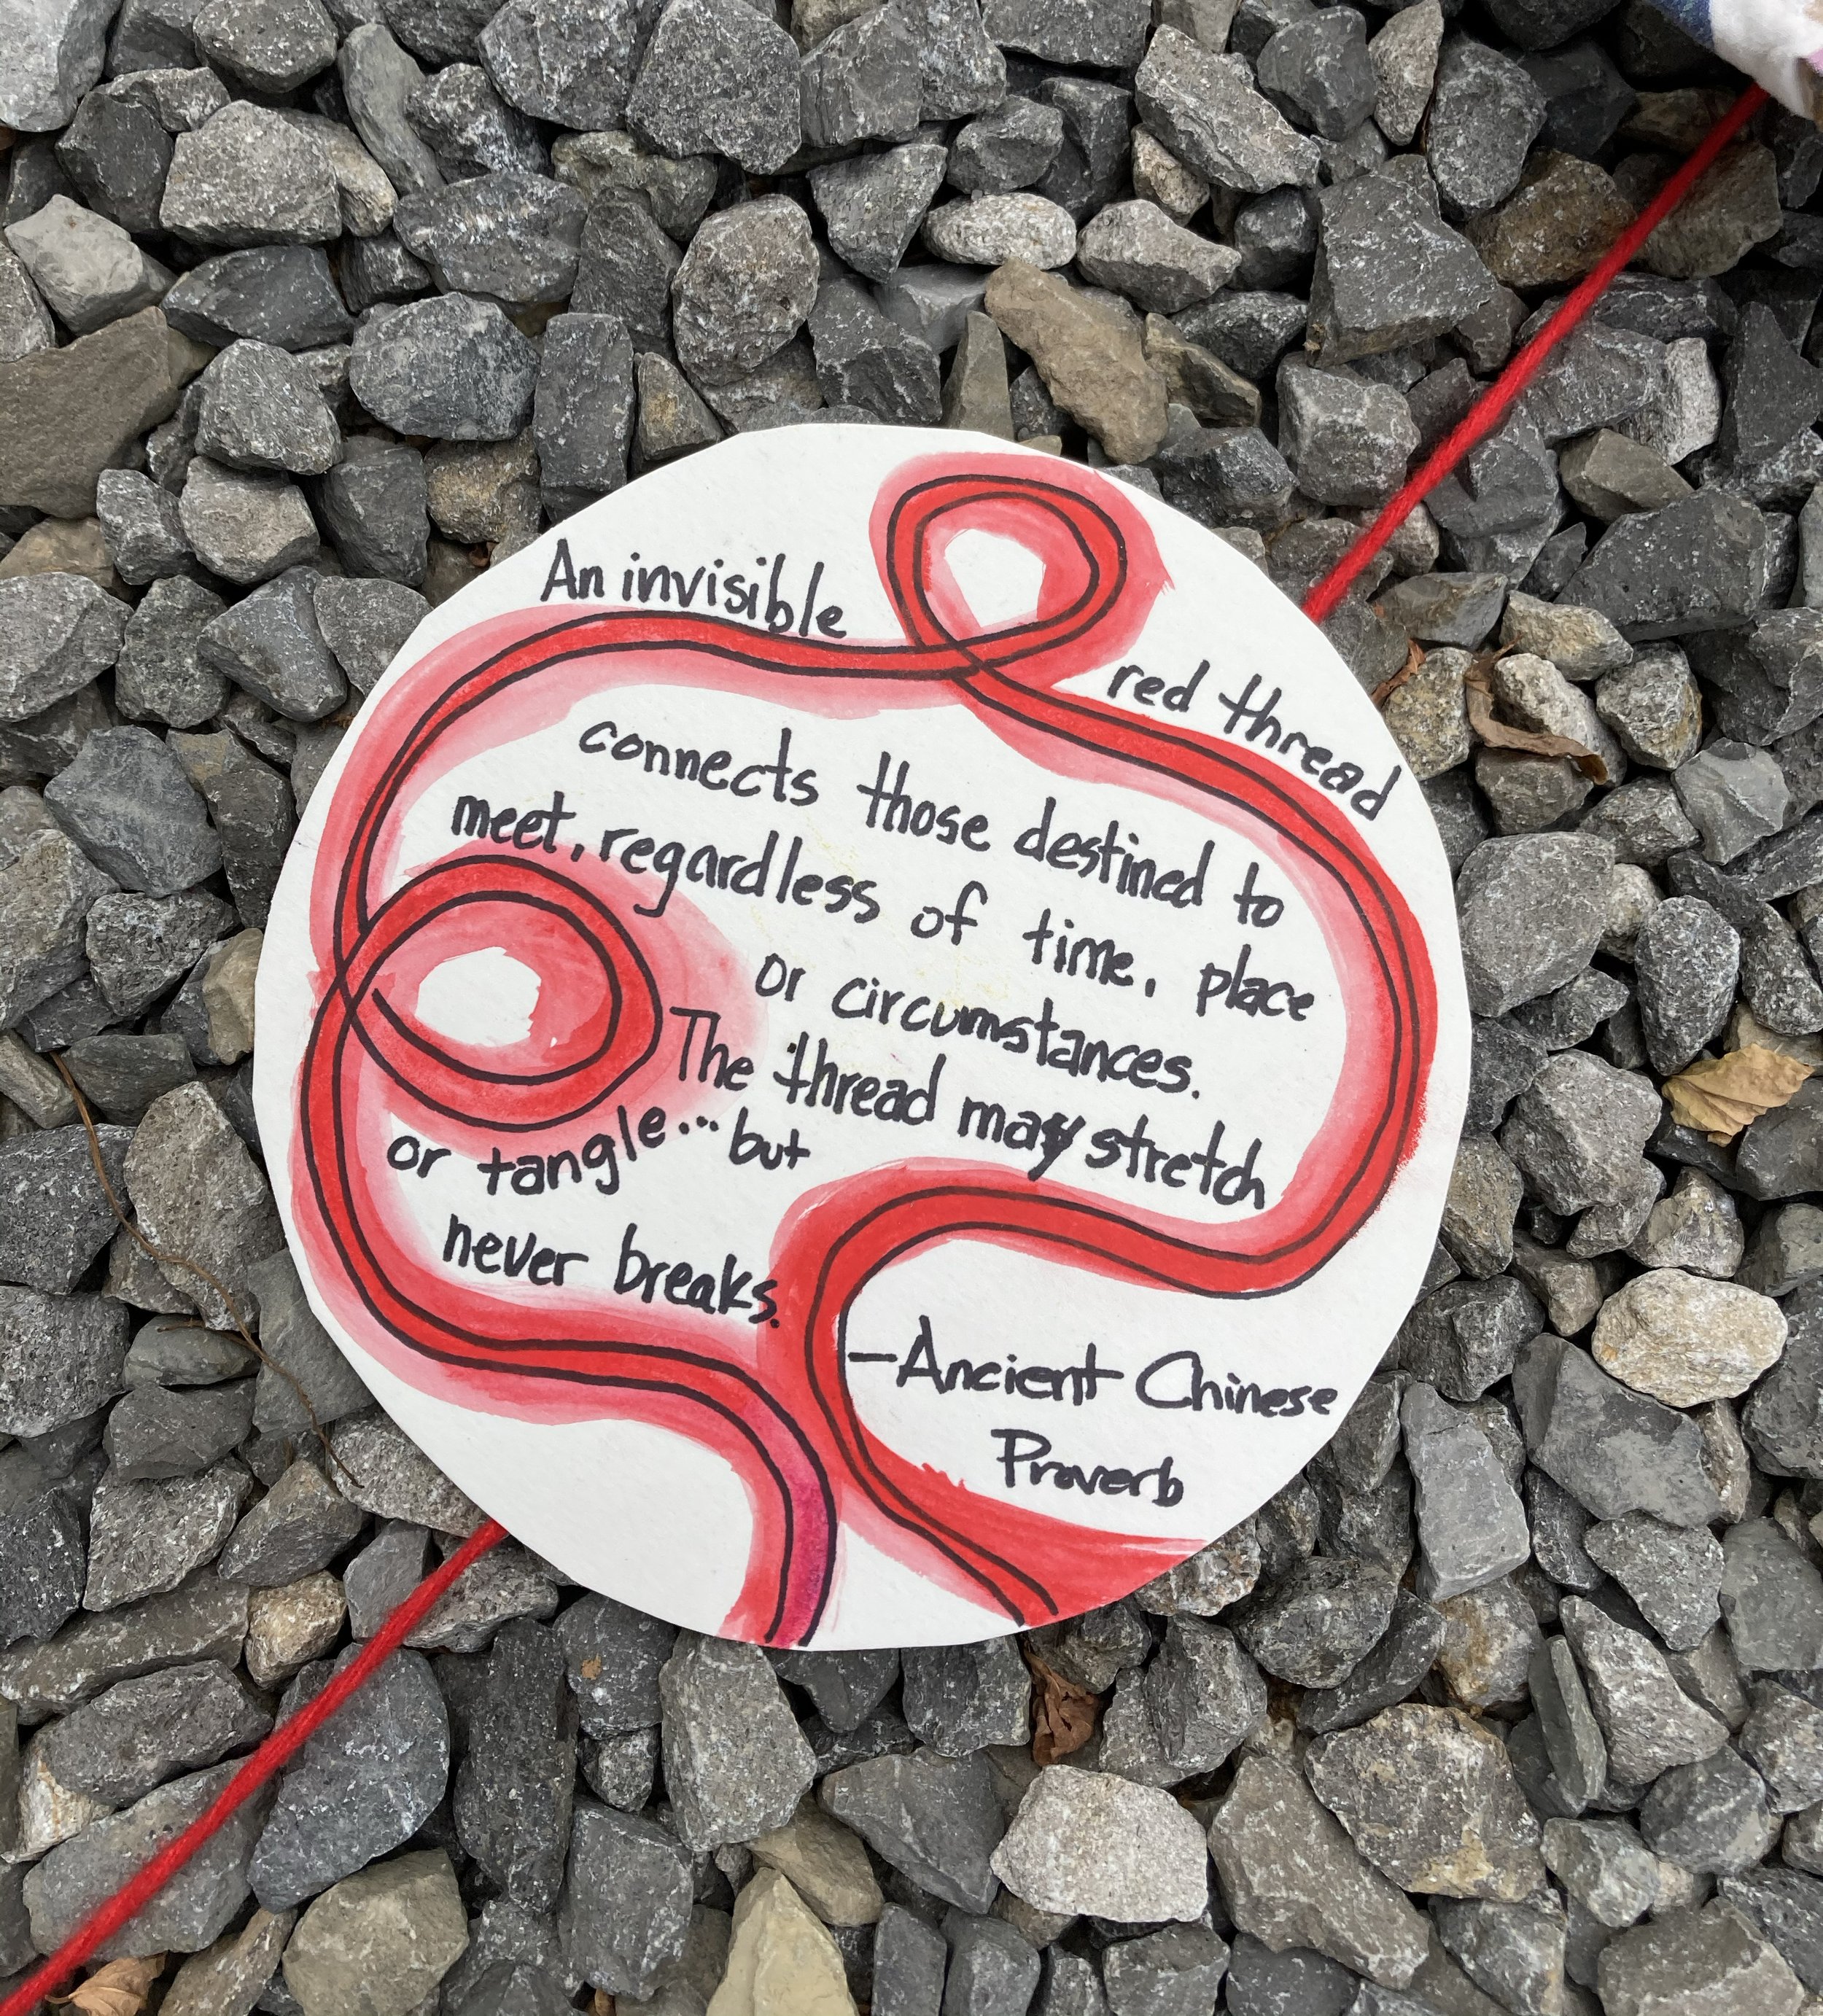 red thread quote on rocks.jpg